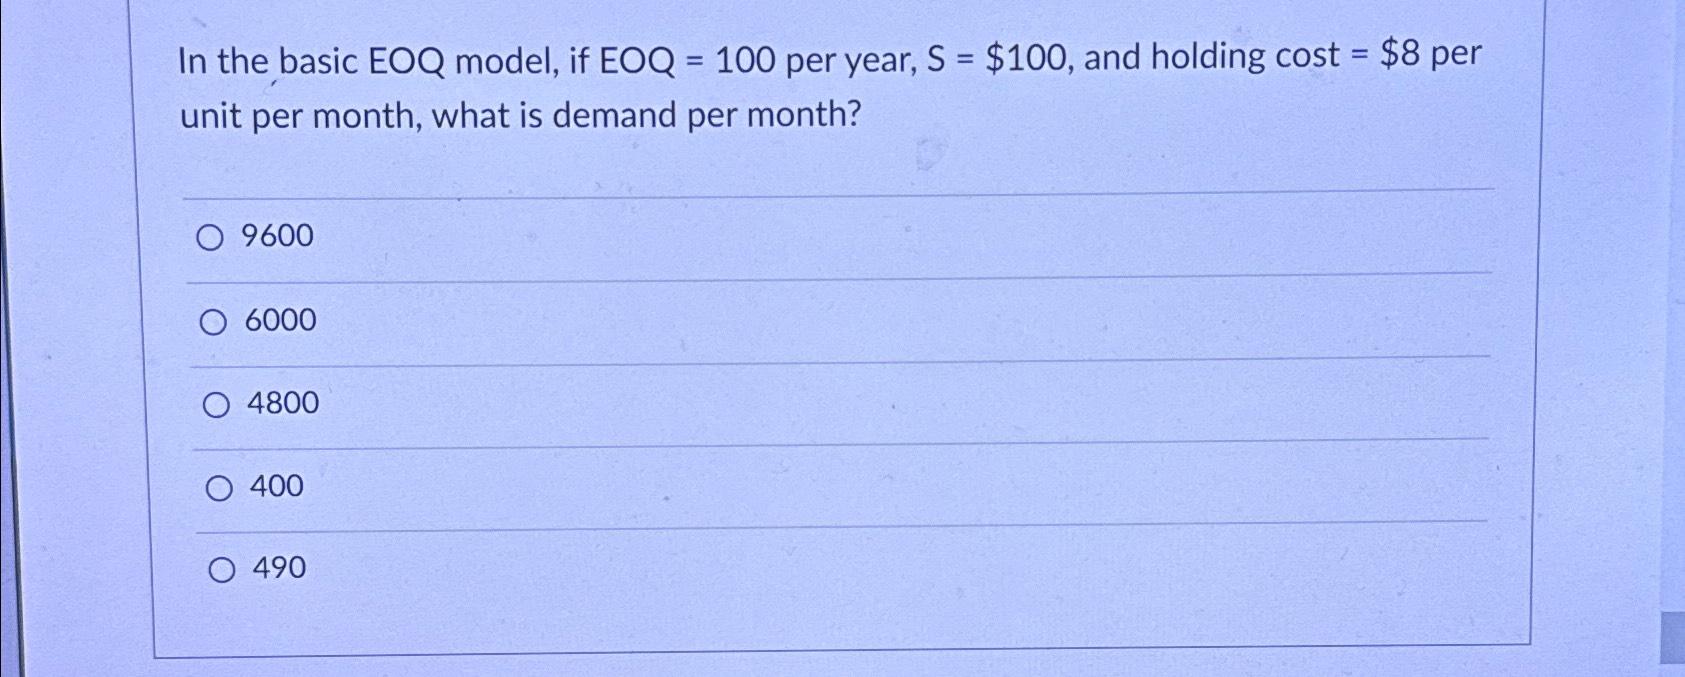 In the basic EOQ model, if EOQ = 100 per year, S = $100, and holding cost = $8 per unit per month, what is